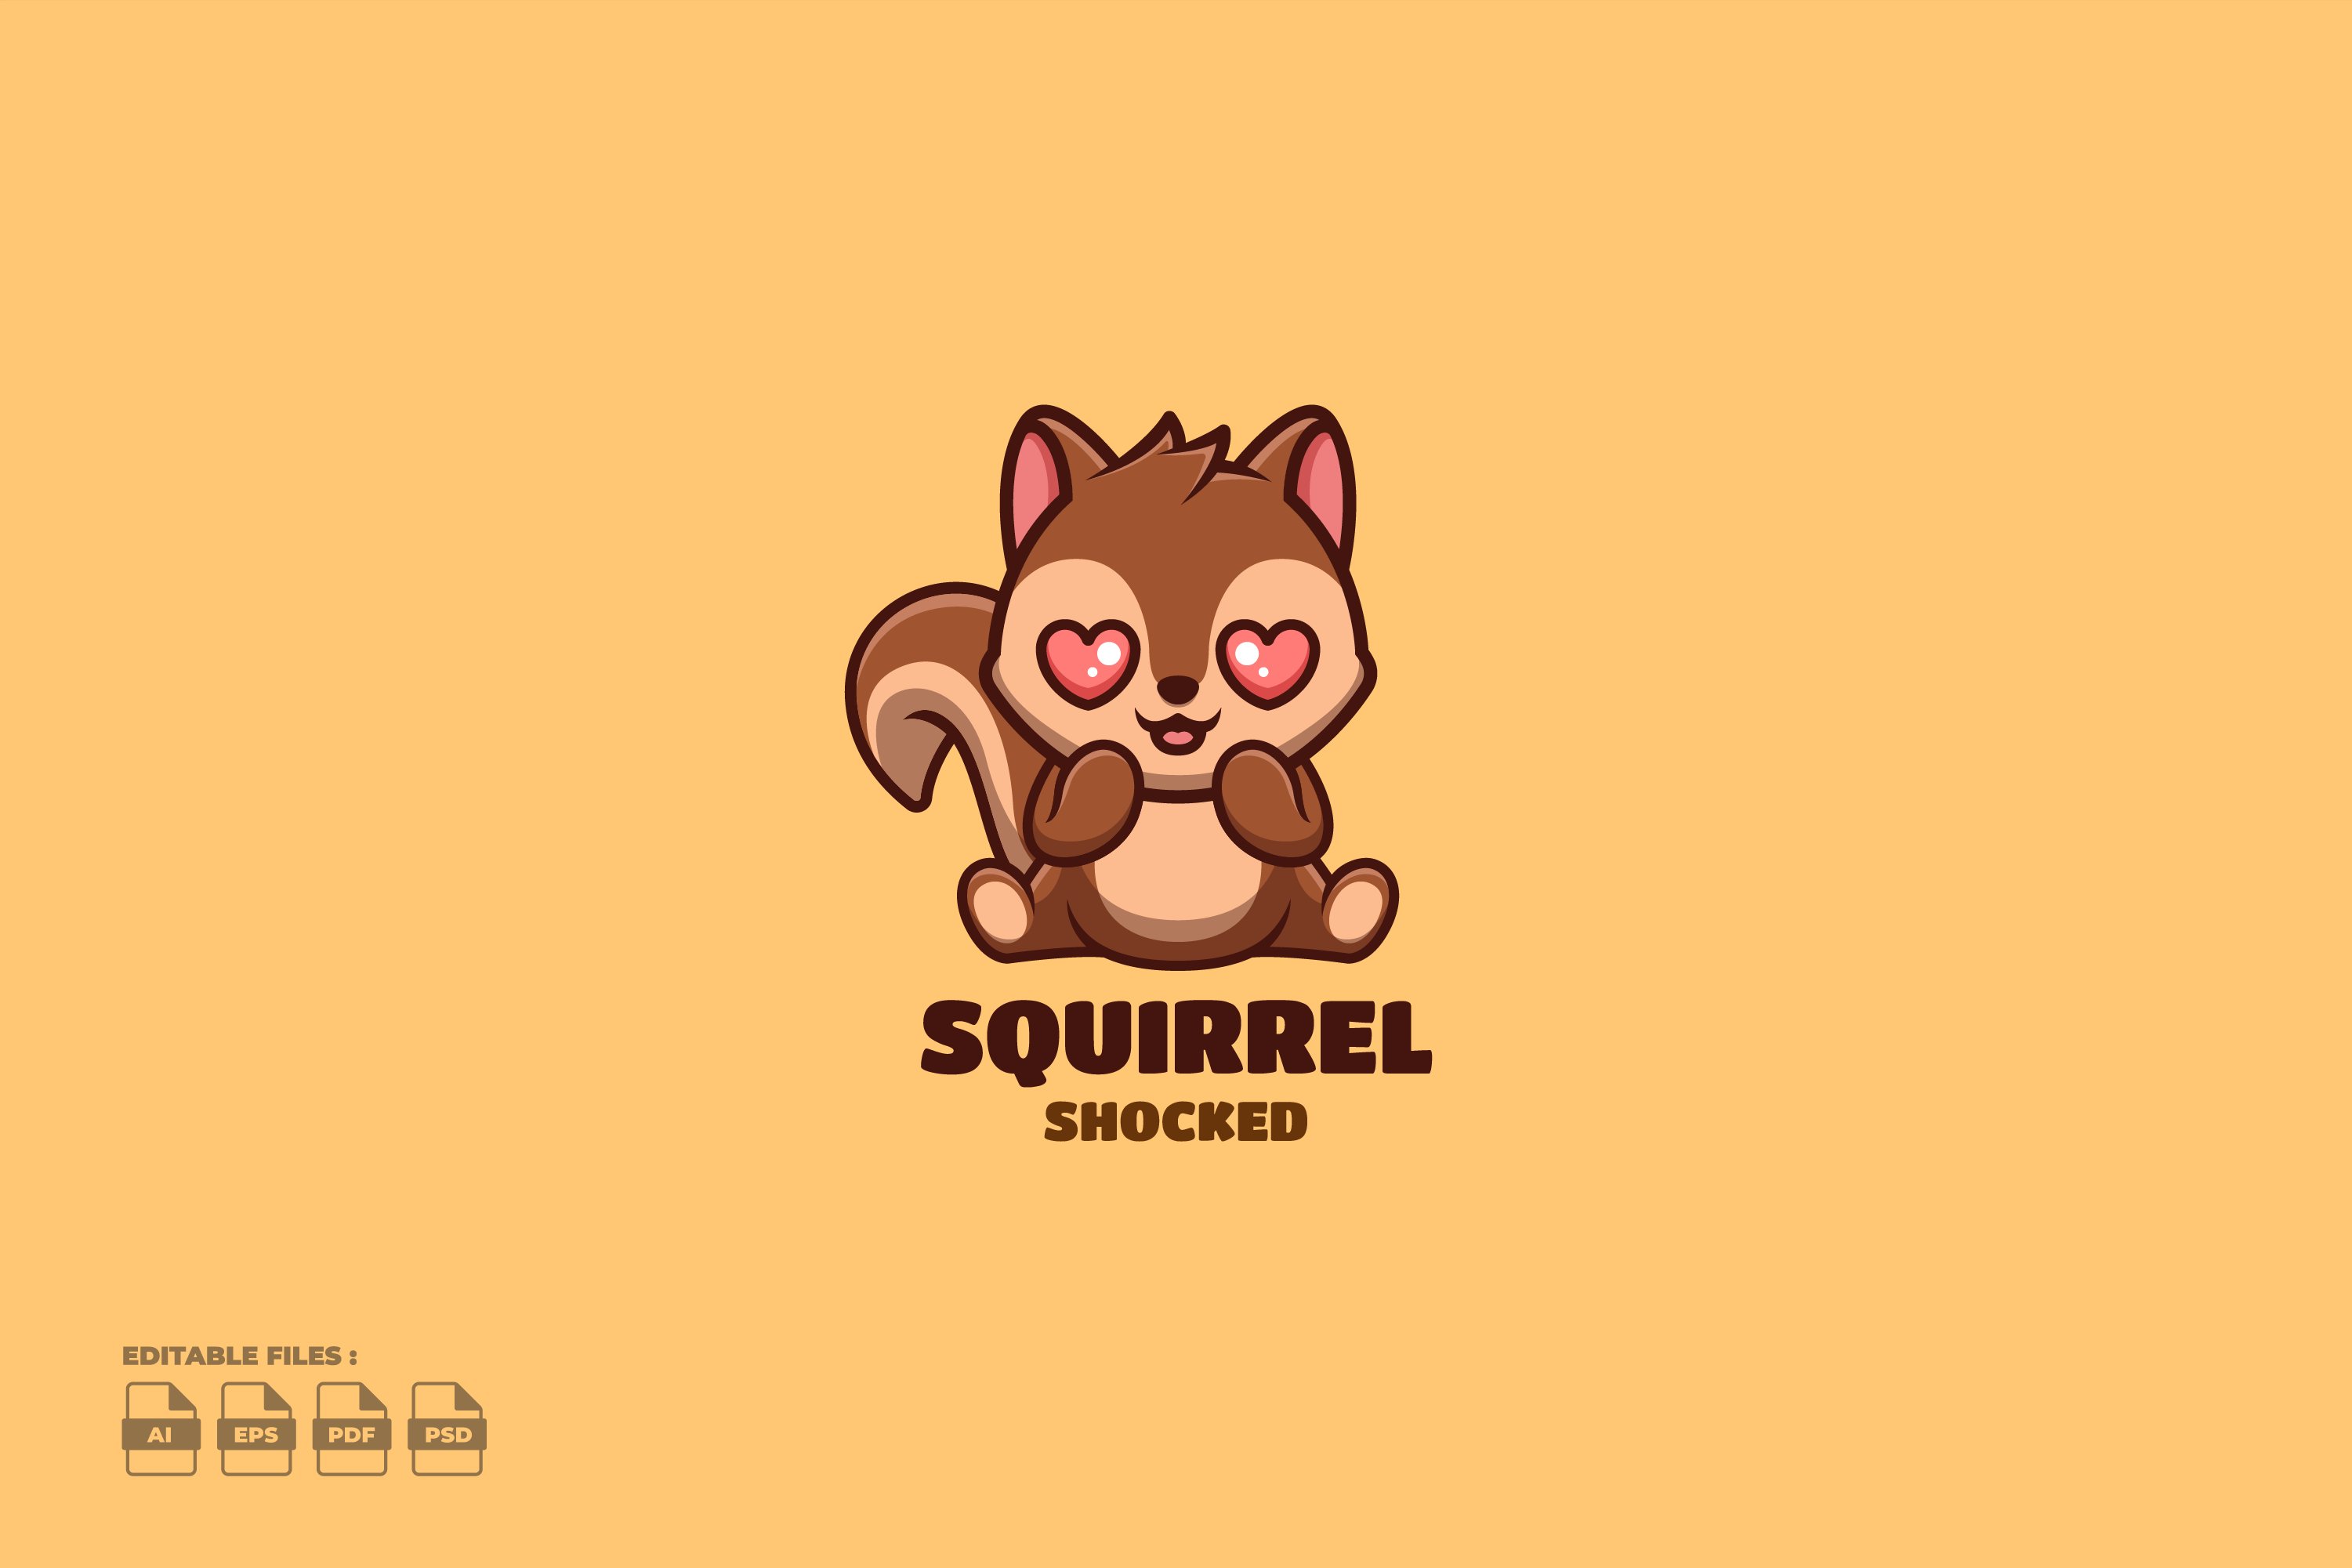 Shocked Squirrel Cute Mascot Logo cover image.